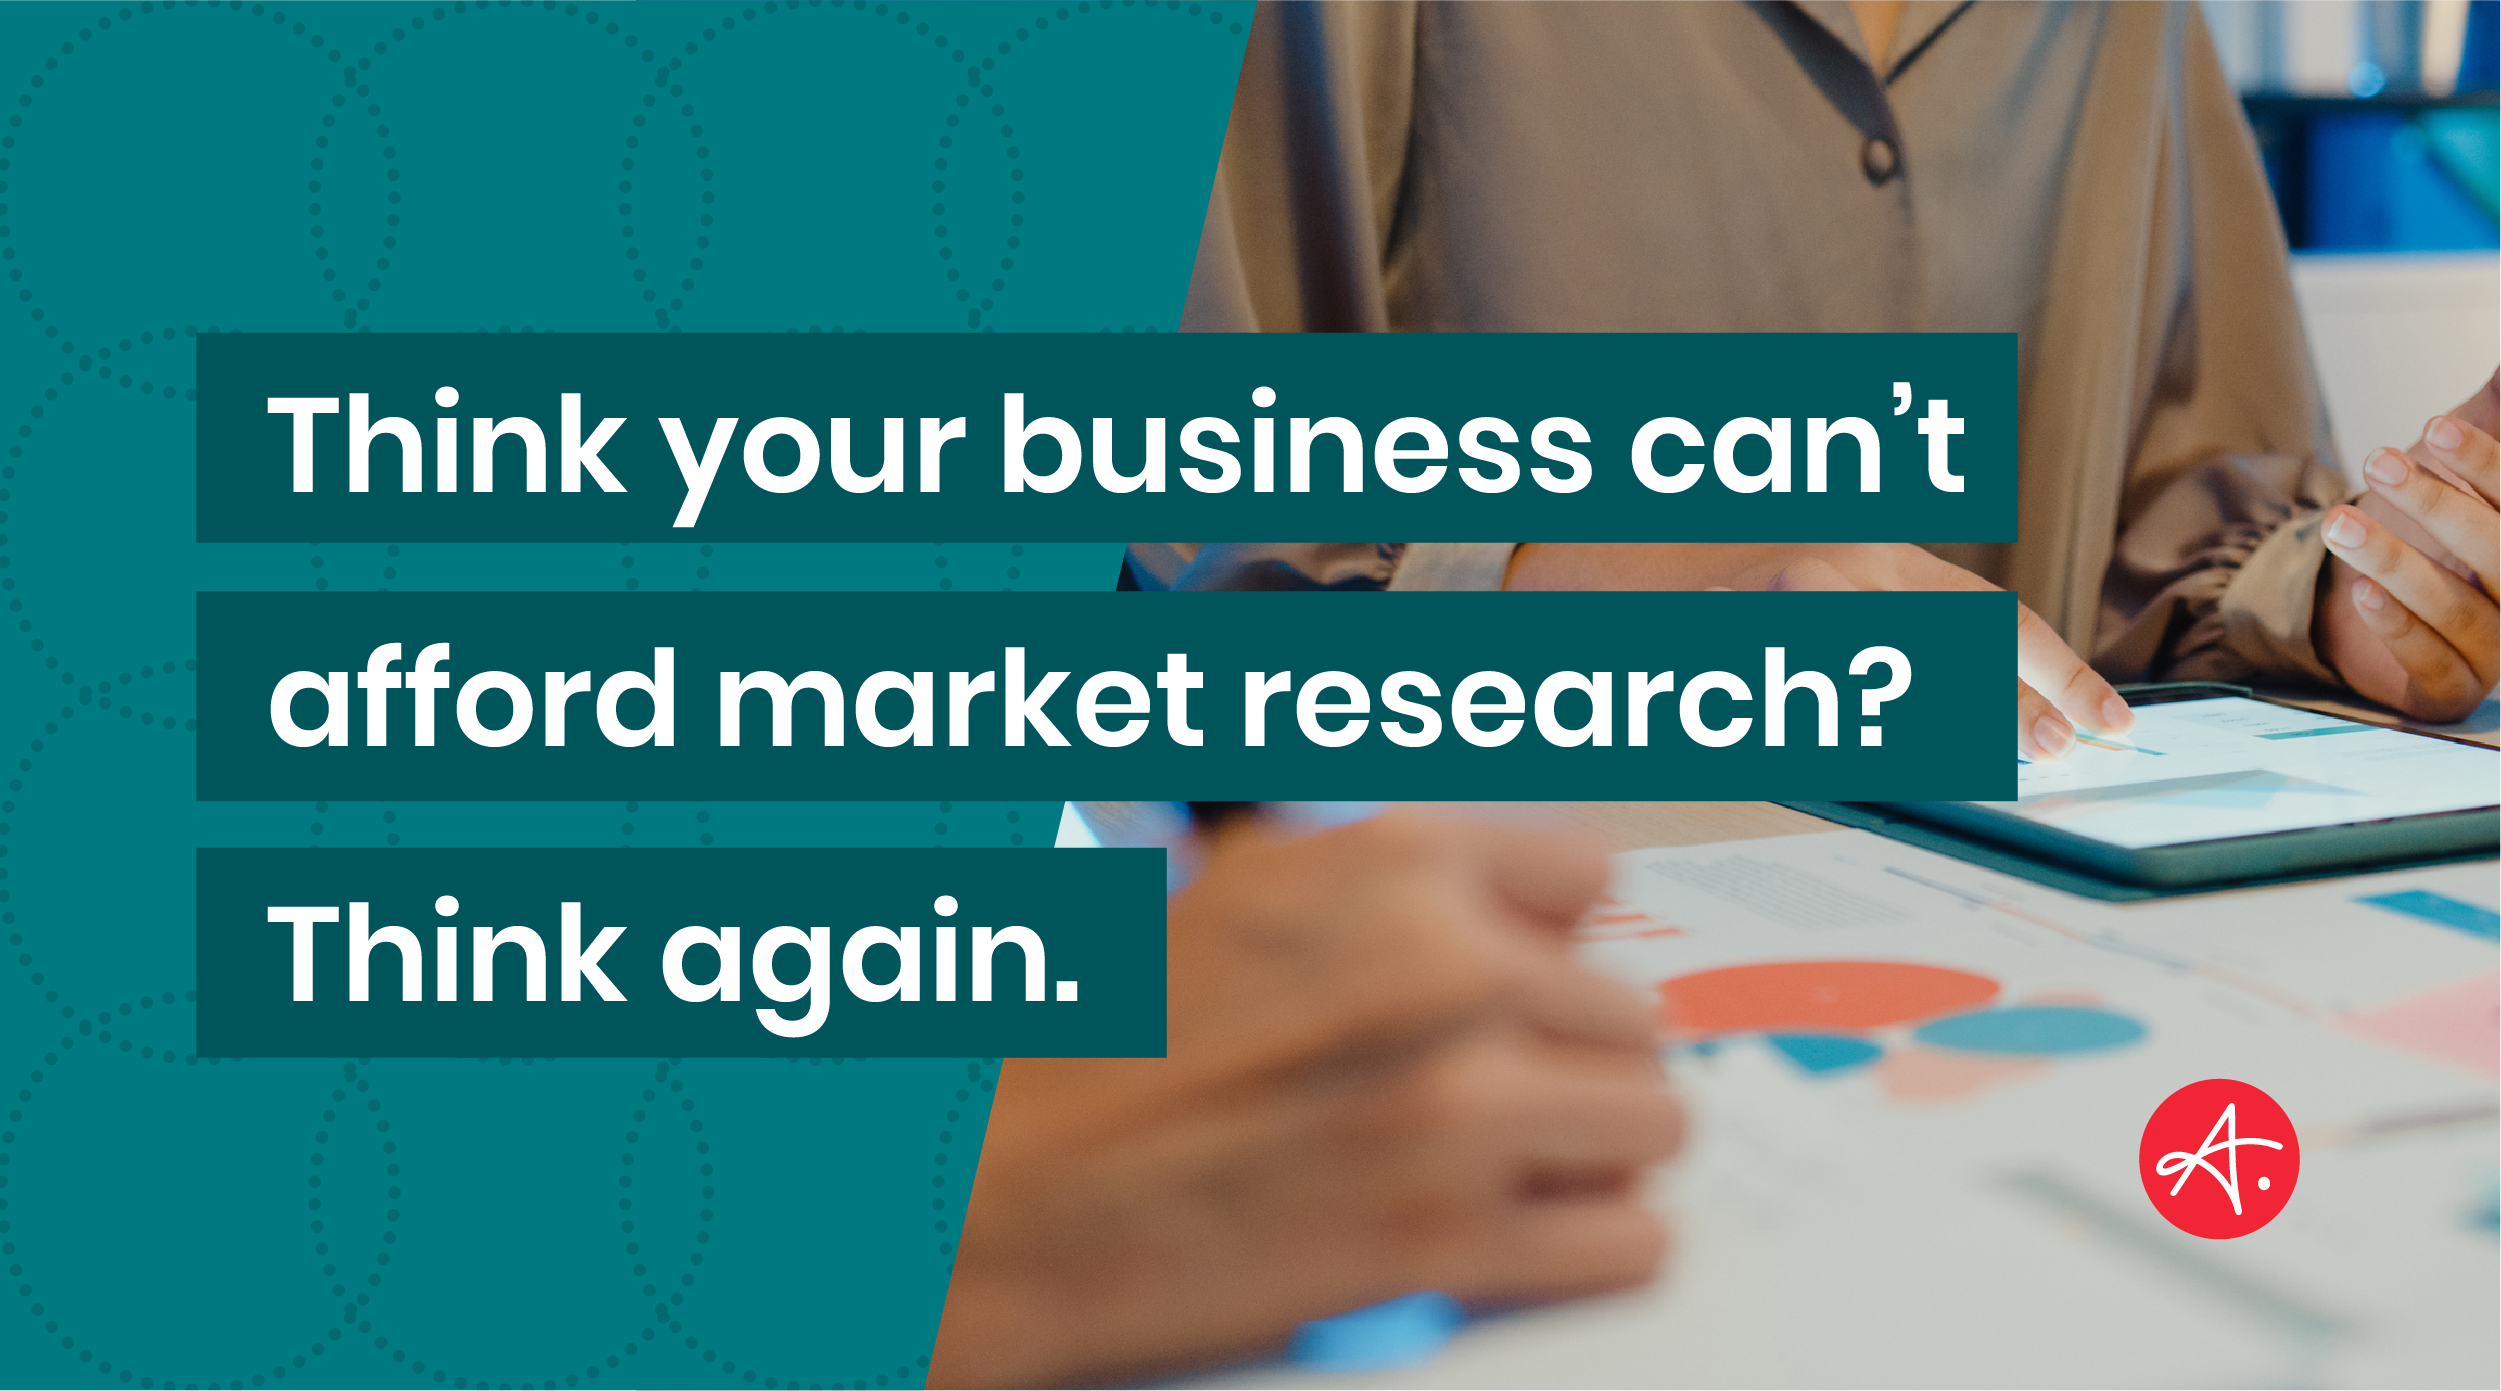 Think your business can’t afford market research? Think again.